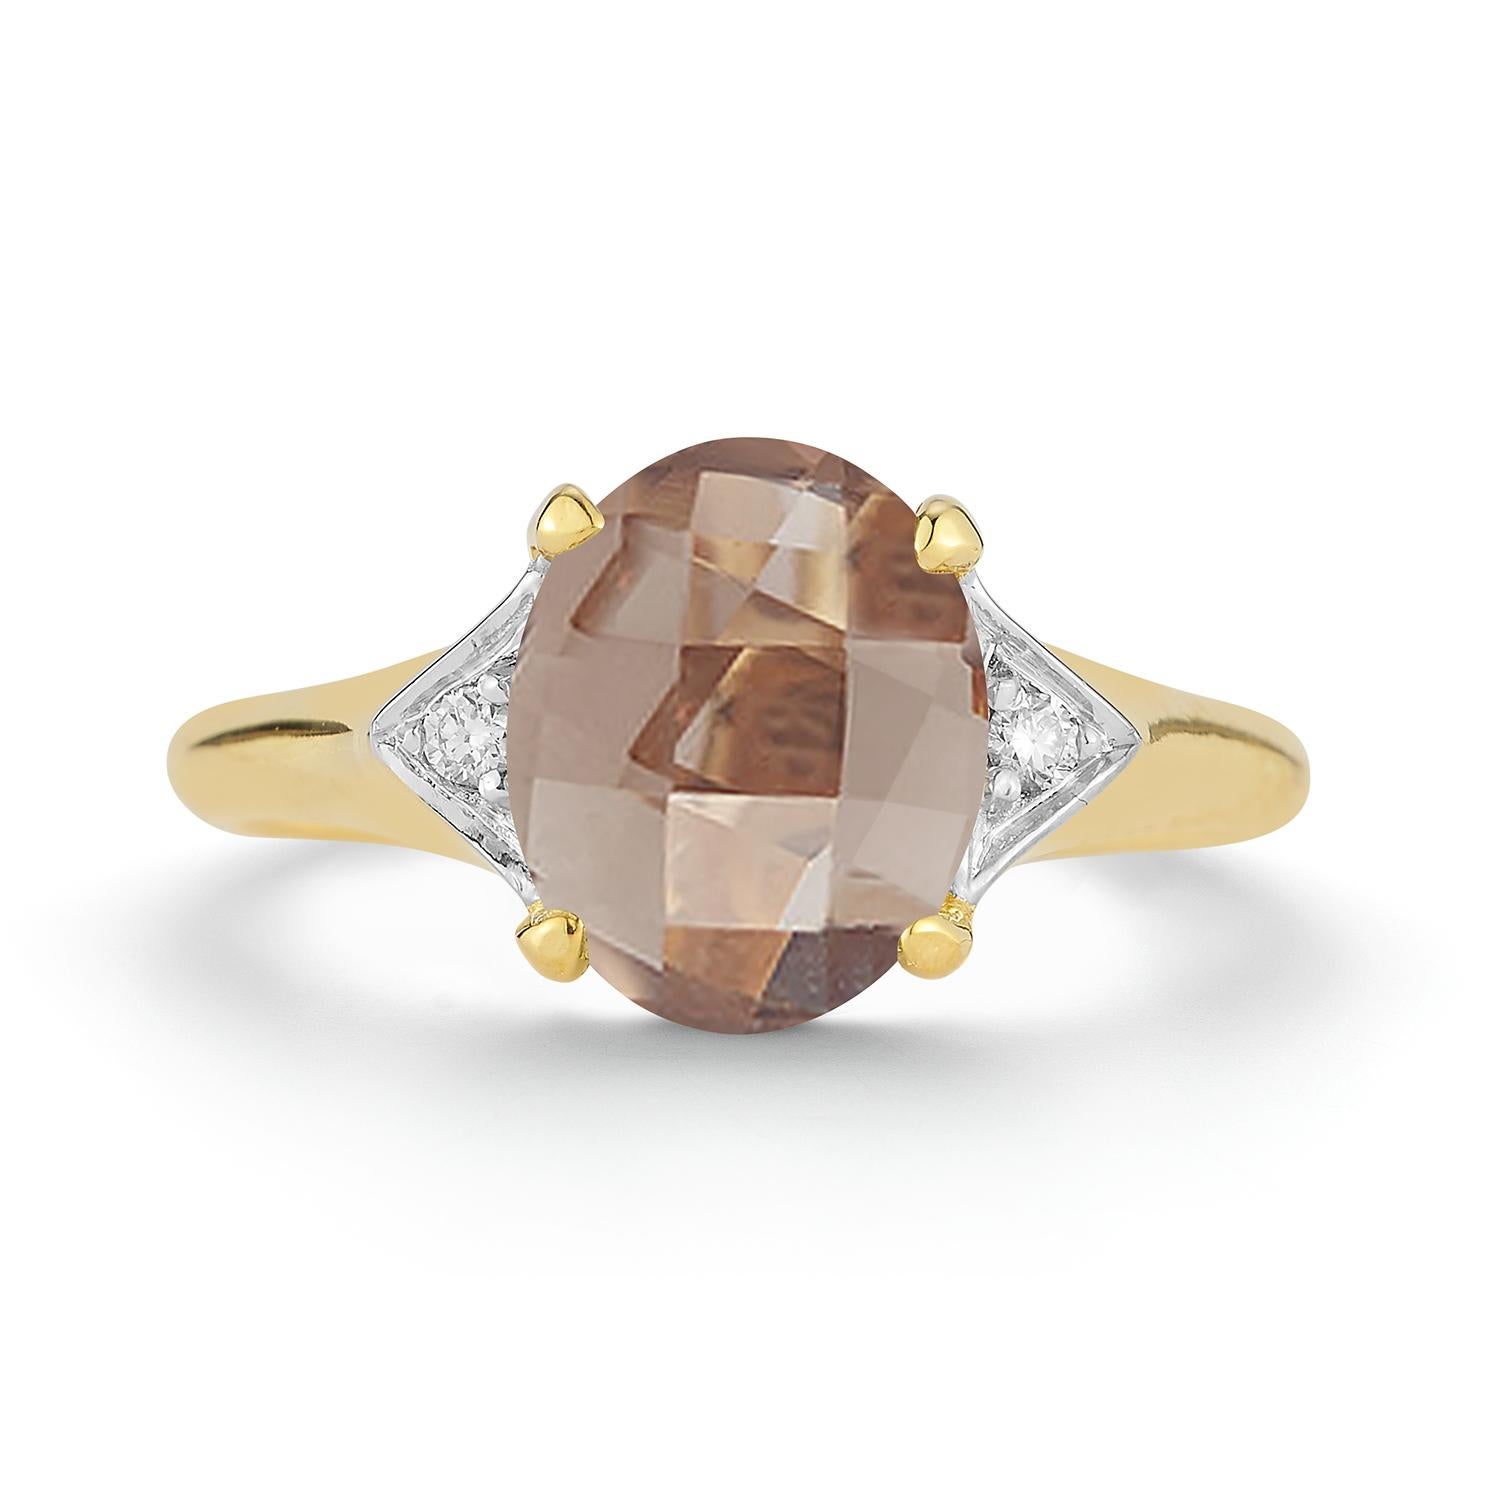 For Sale:  Hand-Crafted 14K Gold 0.05 ct. tw. Diamond & 4.75CT Smokey Topaz Cocktail Ring 2